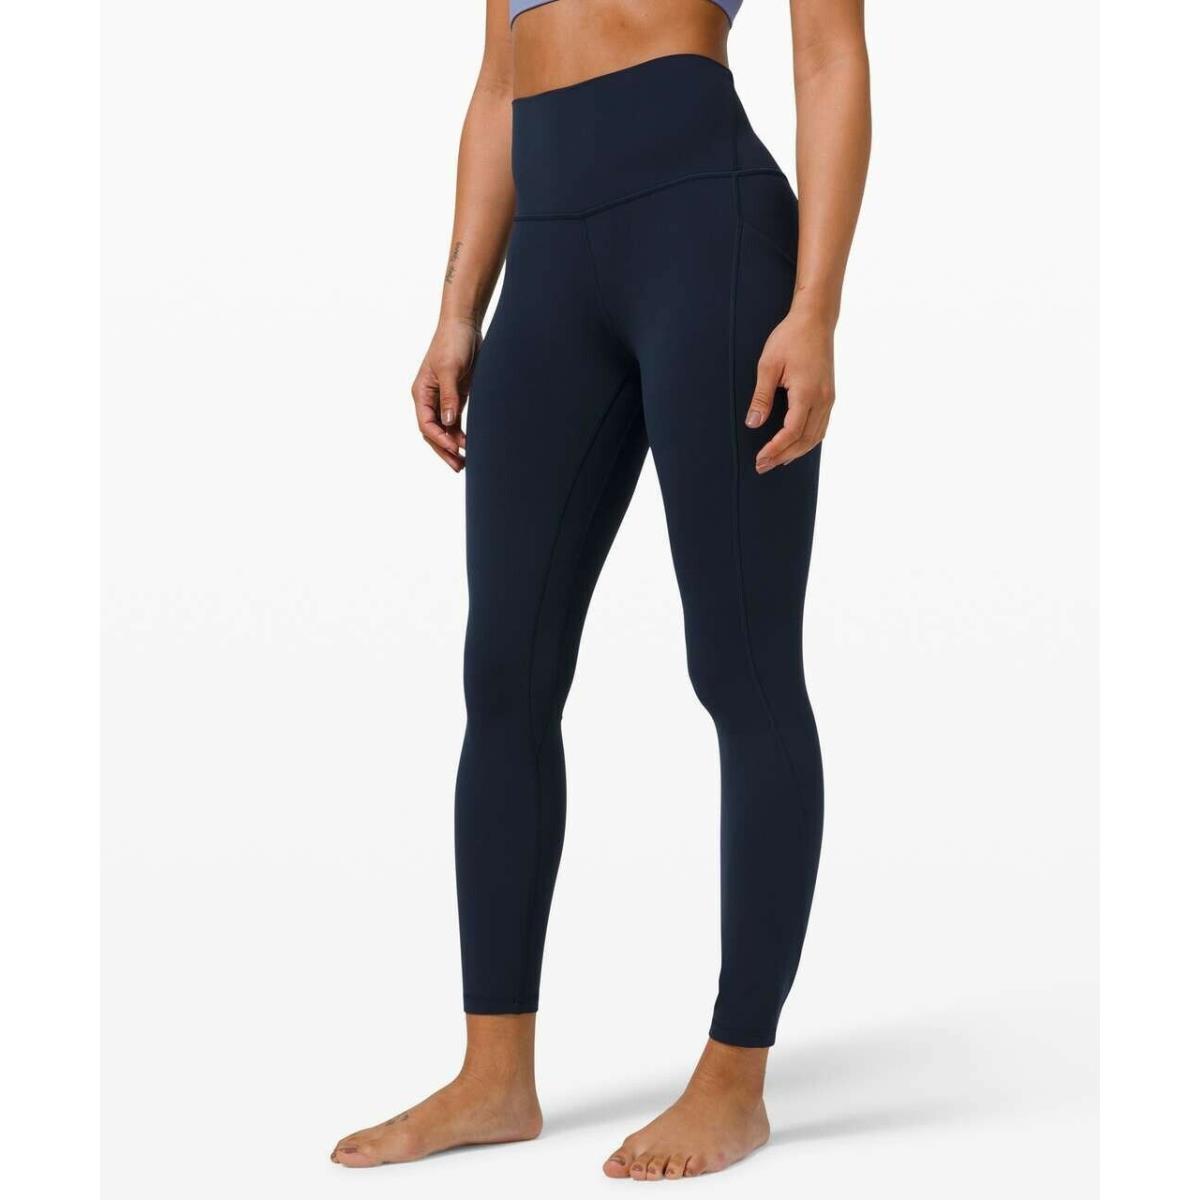 Lululemon Align High-rise Pant with Pockets 25 True Navy / Size 10